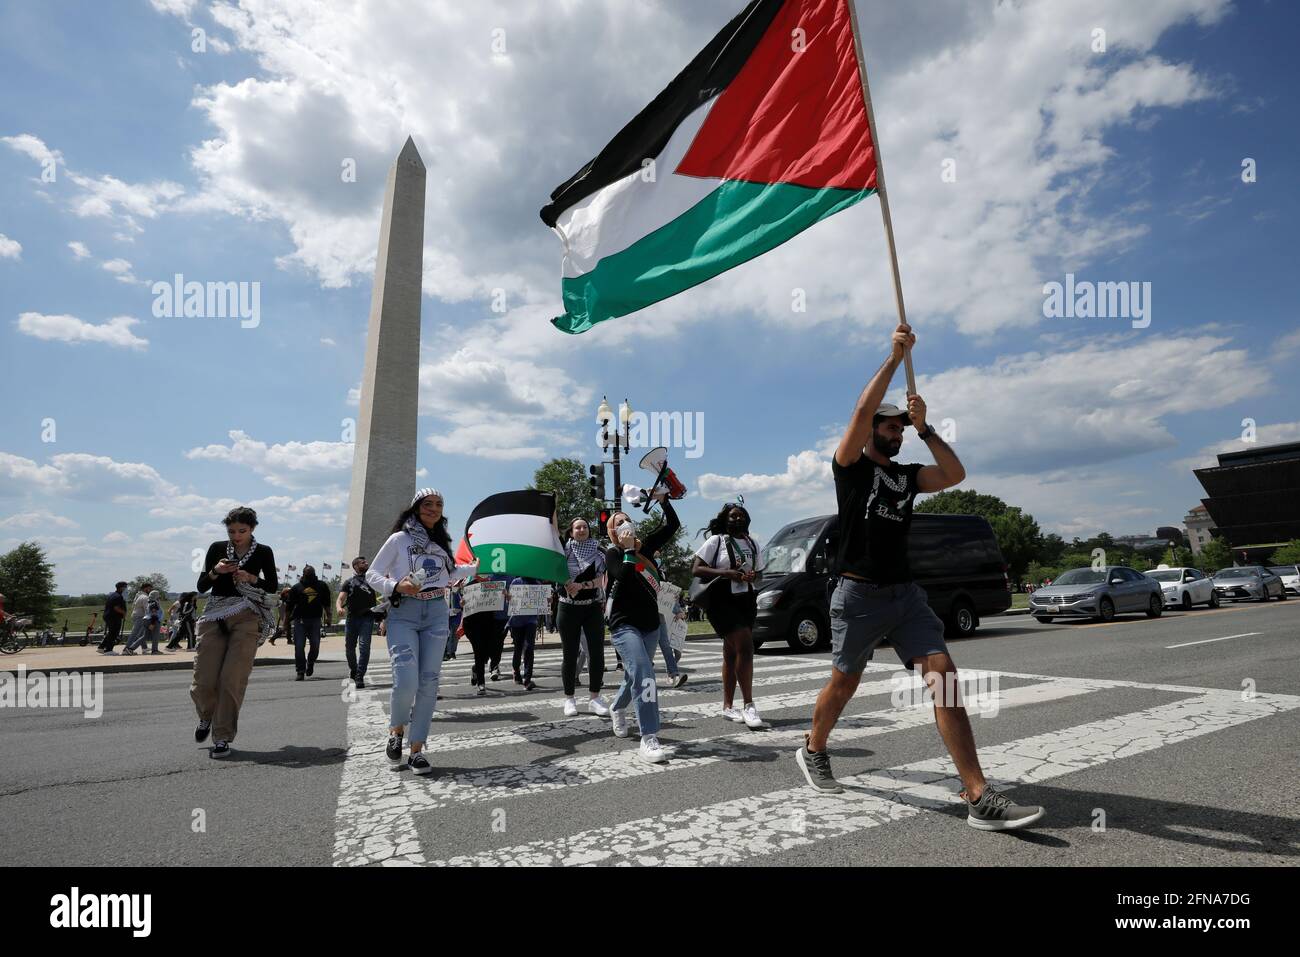 Pro-Palestinian demonstrators protest against the ongoing conflict in Israel and Palestinian territories during a rally at the Washington Monument in Washington, U.S., May 15, 2021. REUTERS/Yuri Gripas Stock Photo